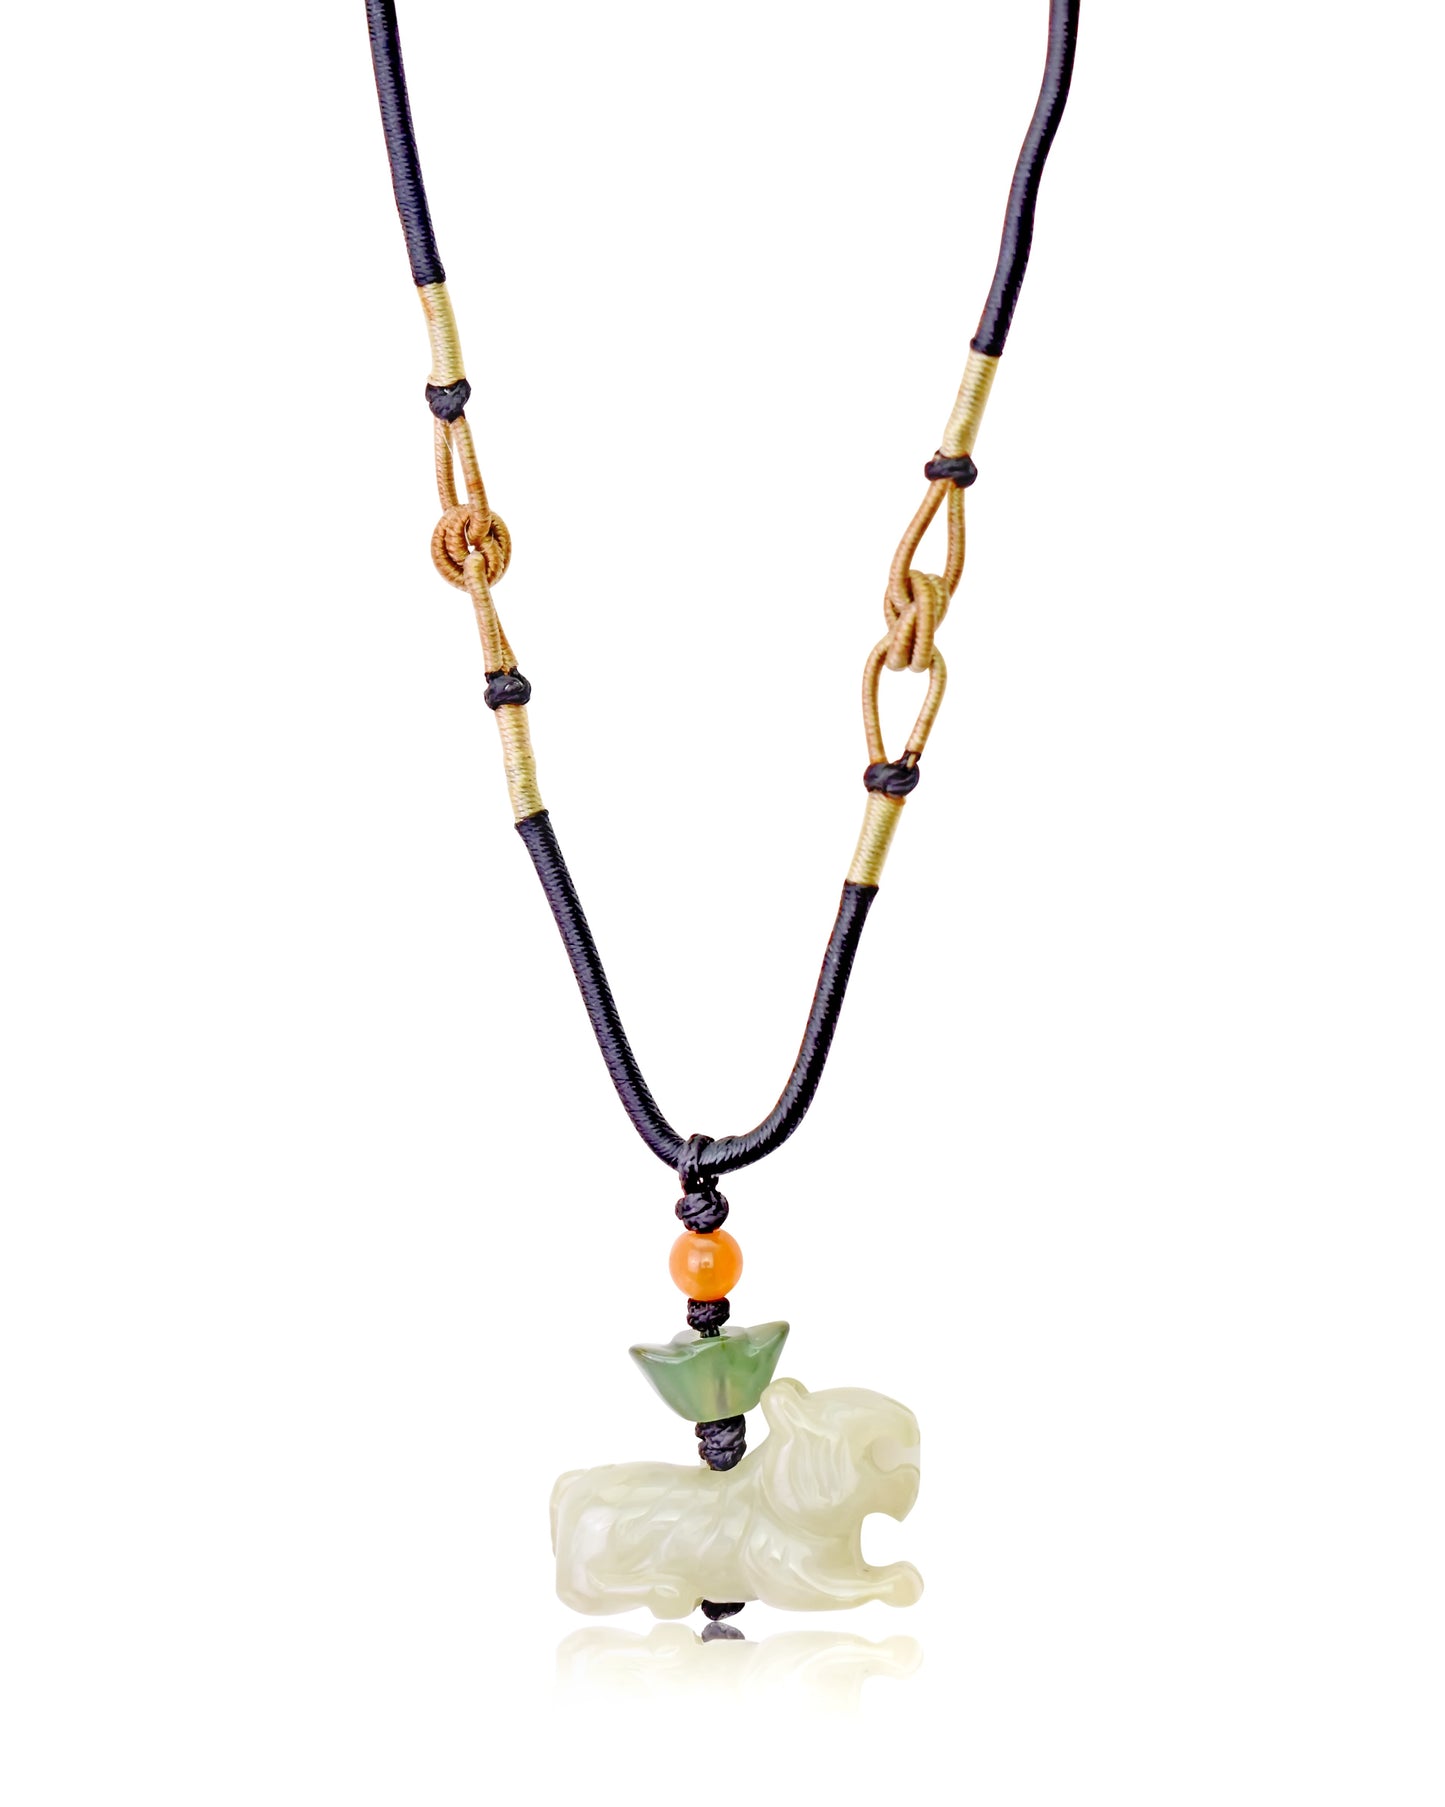 Shine with Confidence with the Tiger Chinese Zodiac Necklace made with Black Cord